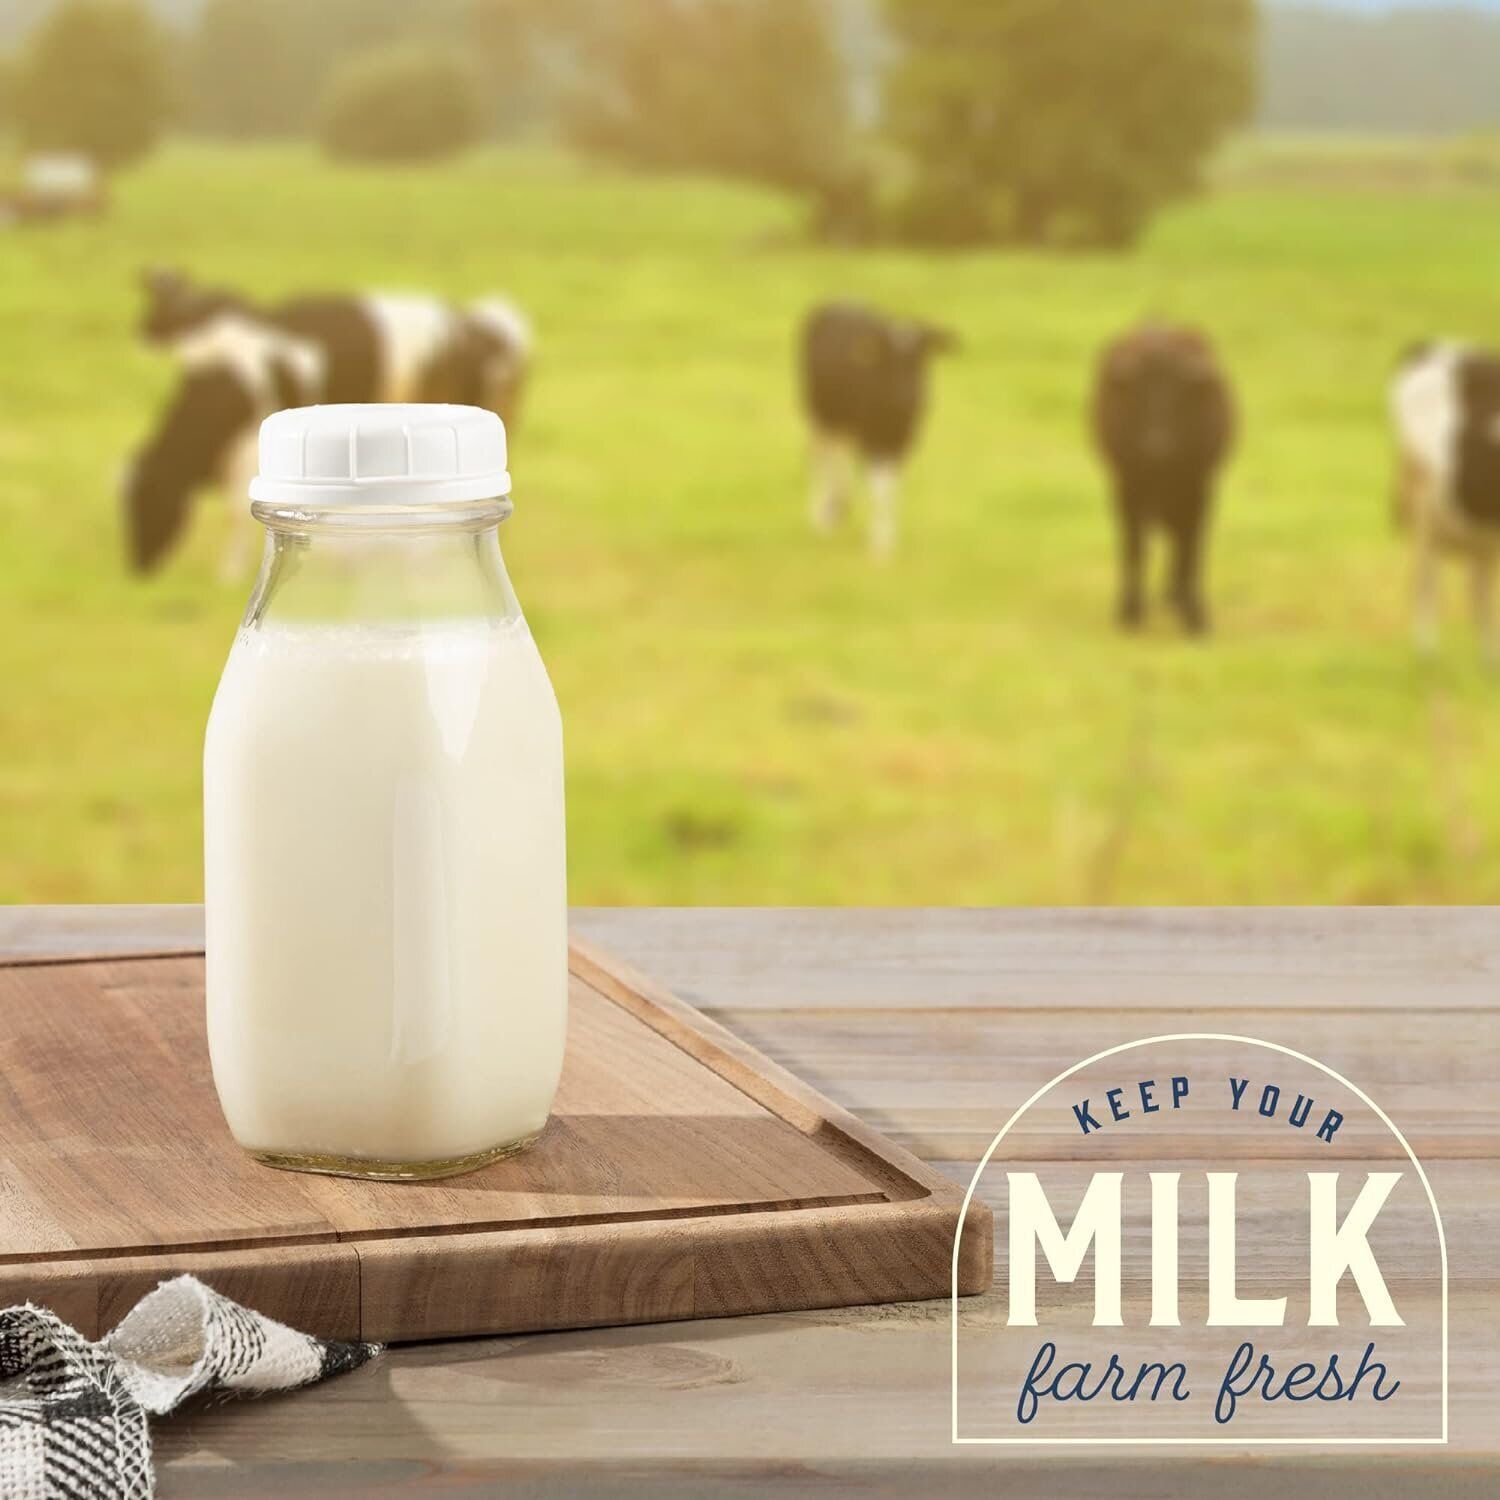 kitchentoolz 12 Oz Square Glass Milk Bottle with Lids- Perfect Milk Container...